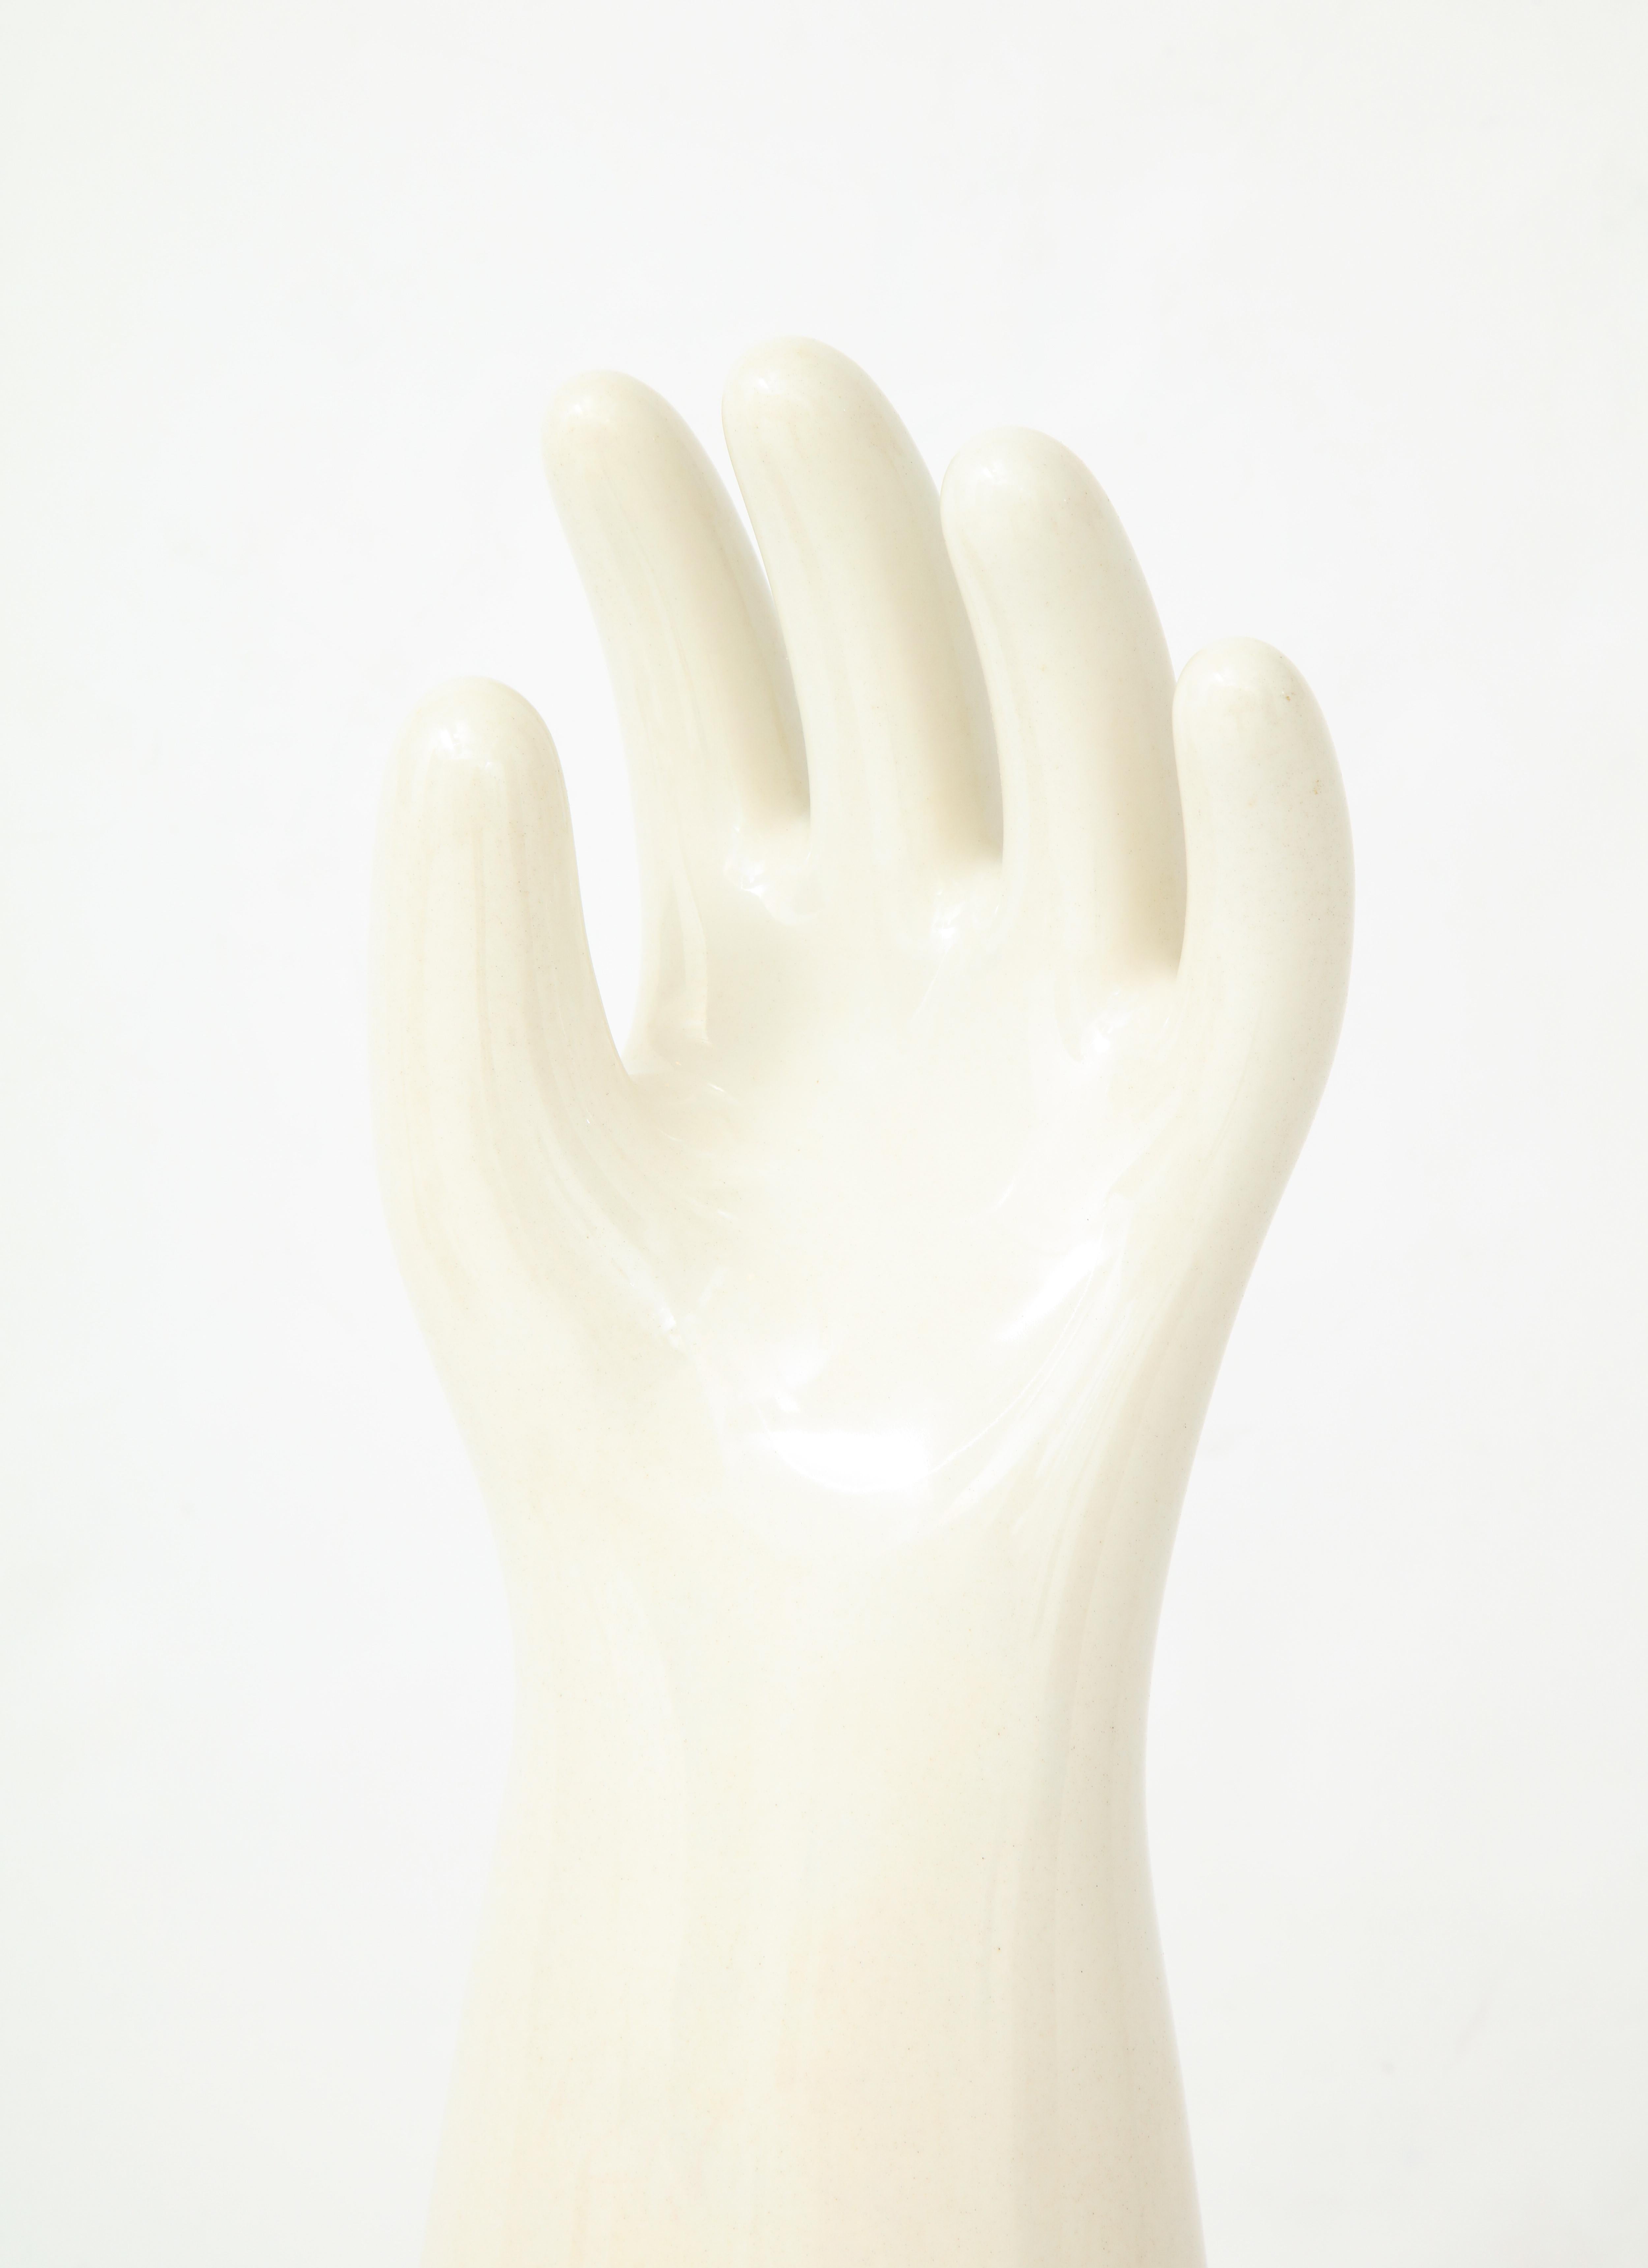 Porcelain Hand Glove Mold In Good Condition For Sale In New York, NY